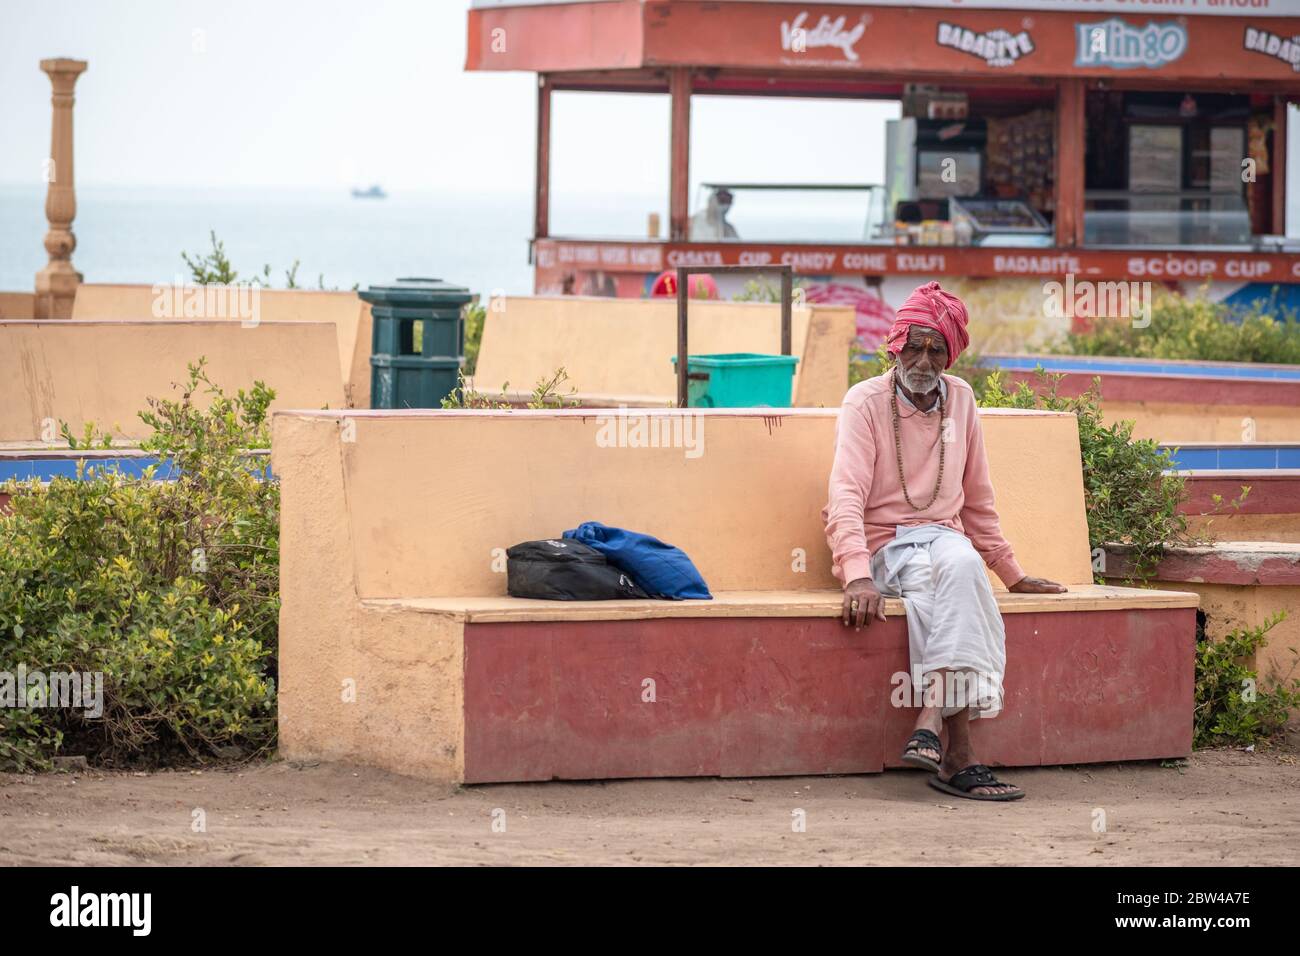 Somnath, Gujarat, India - December 2018: An elderly Indian man sitting on  a bench in a seaside park in the town of Somnath. Stock Photo